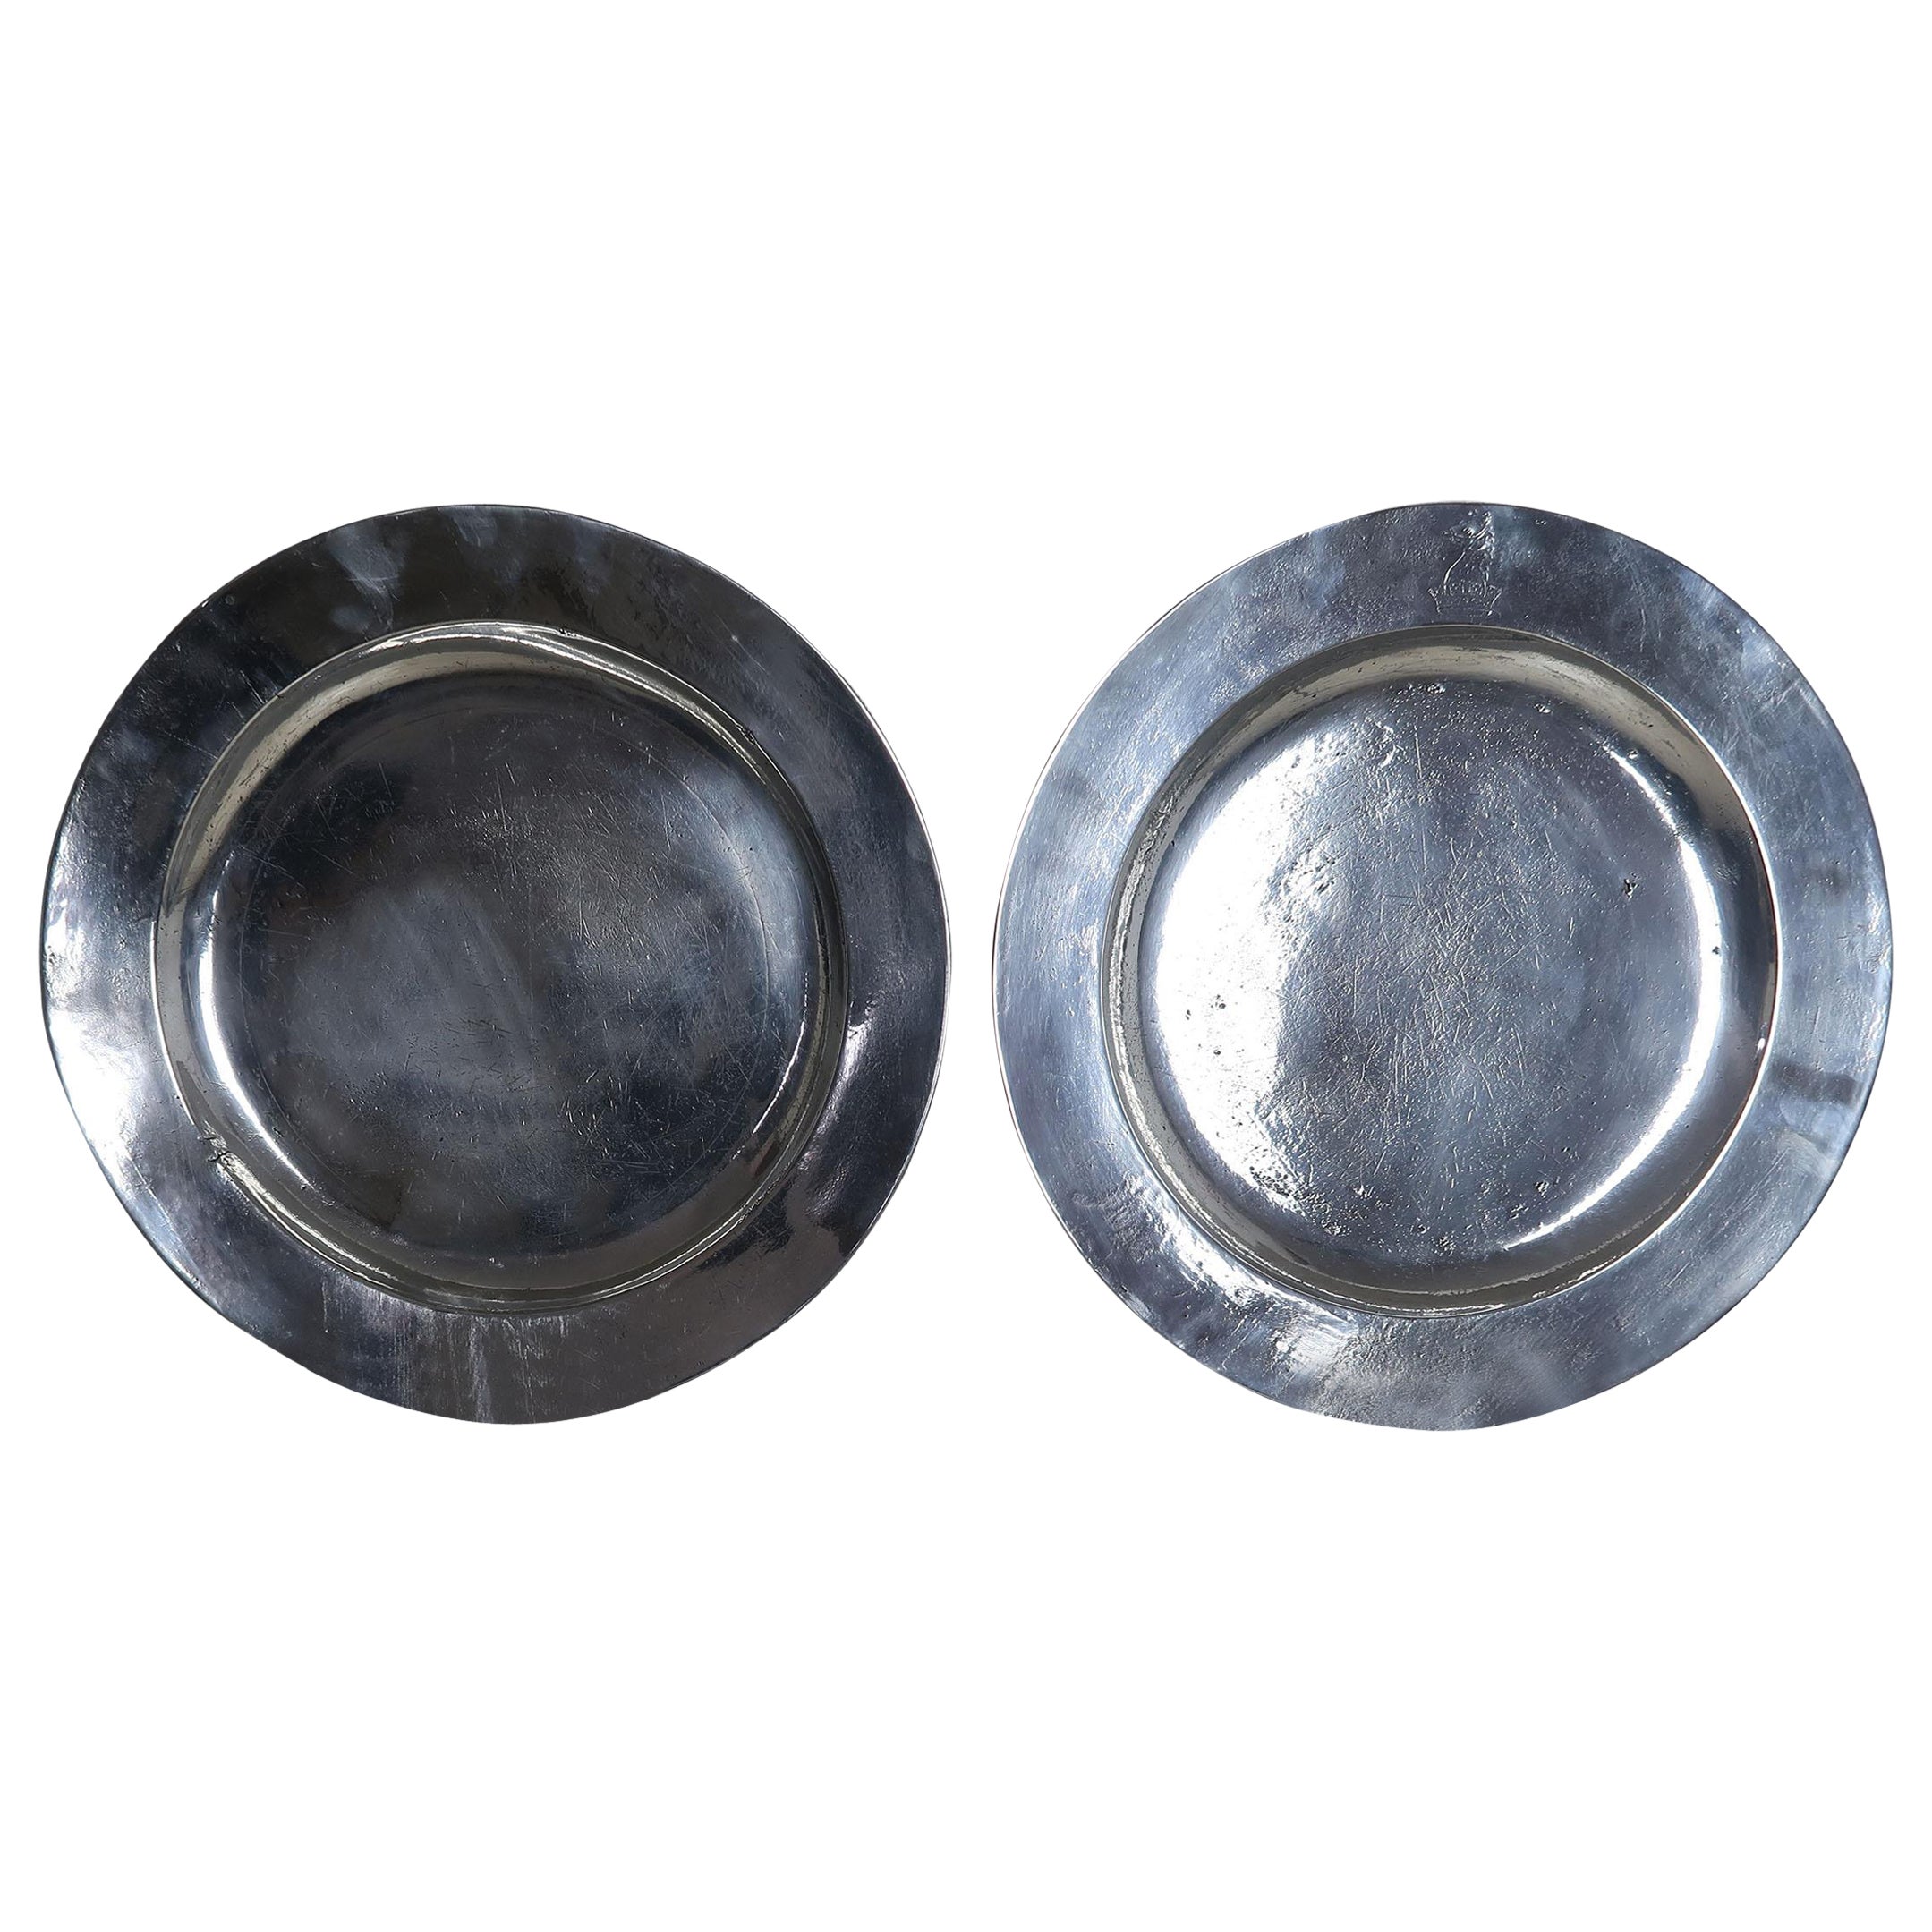 Large Pair of Antique Brightly Polished Pewter Chargers, English, 18th Century